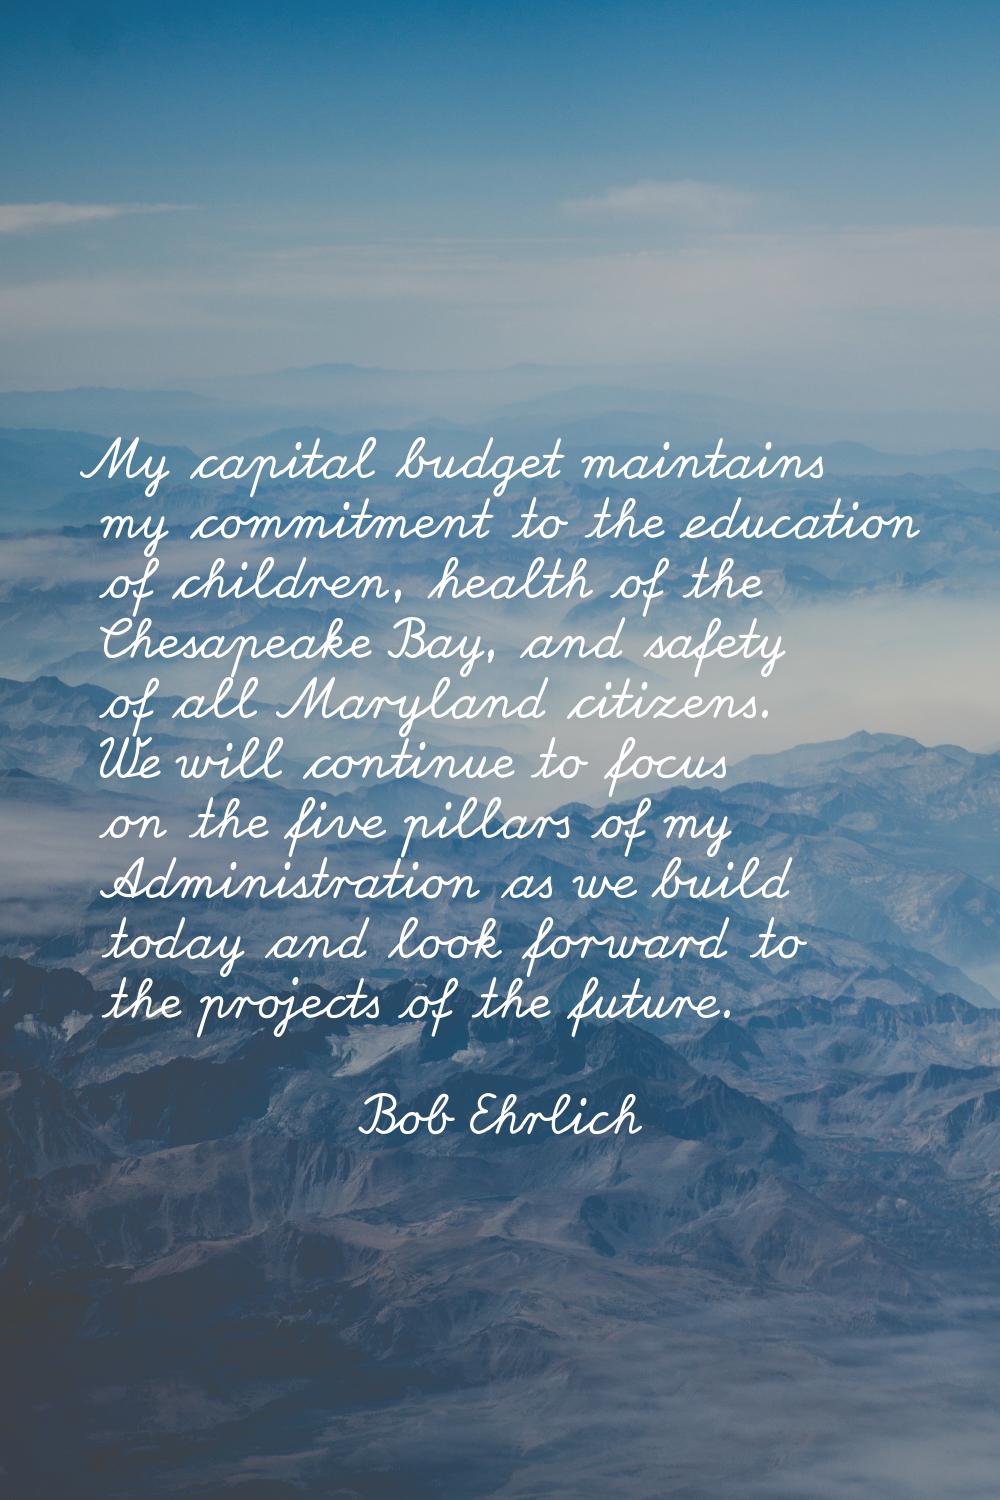 My capital budget maintains my commitment to the education of children, health of the Chesapeake Ba